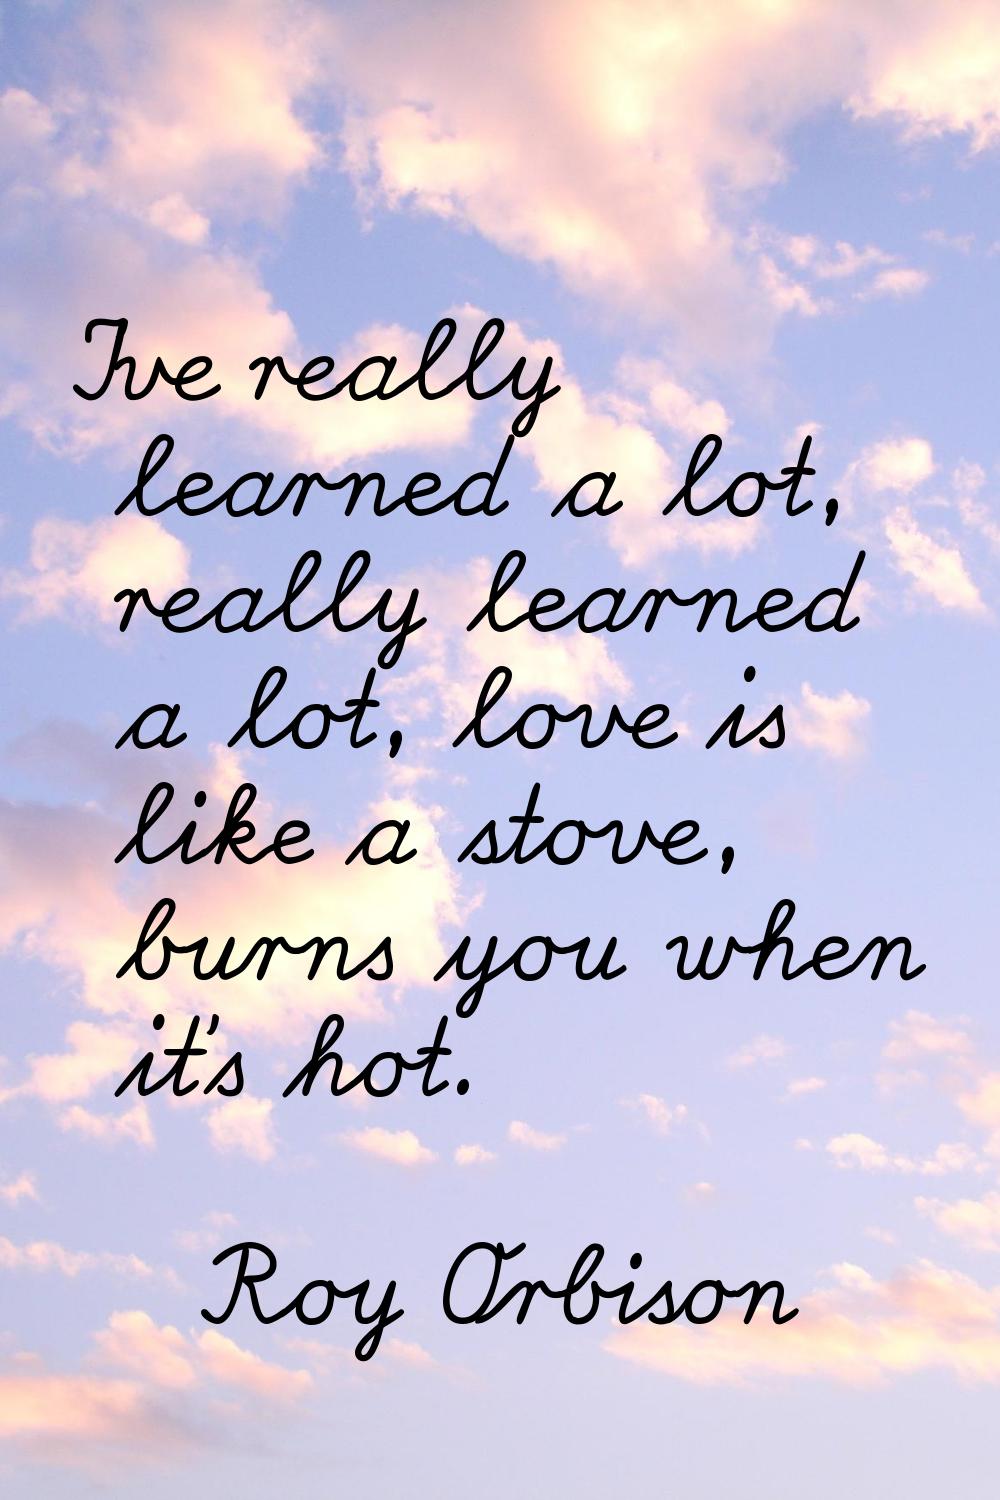 I've really learned a lot, really learned a lot, love is like a stove, burns you when it's hot.